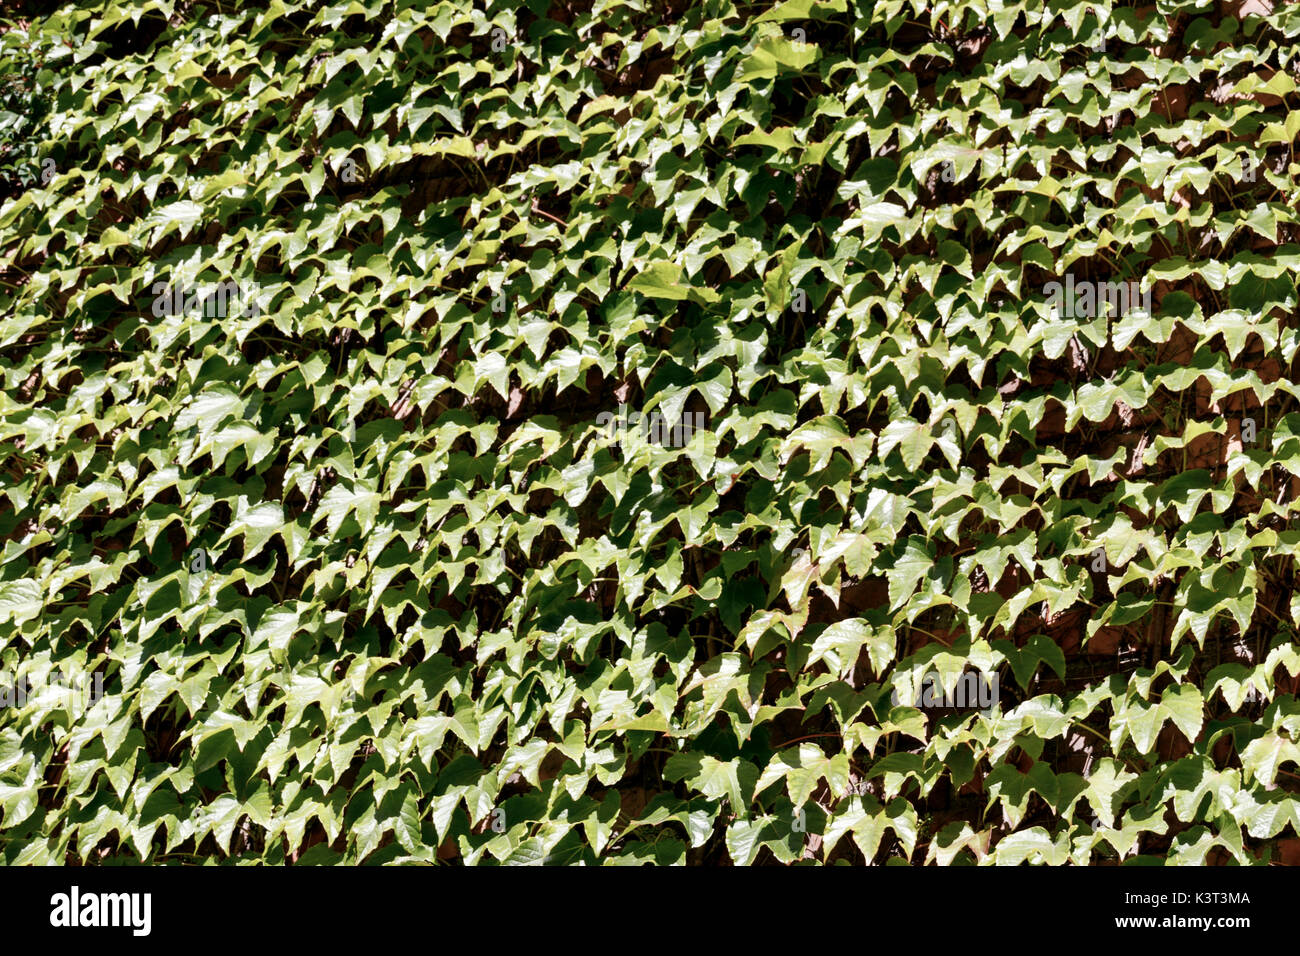 Textural background of green leaves Stock Photo